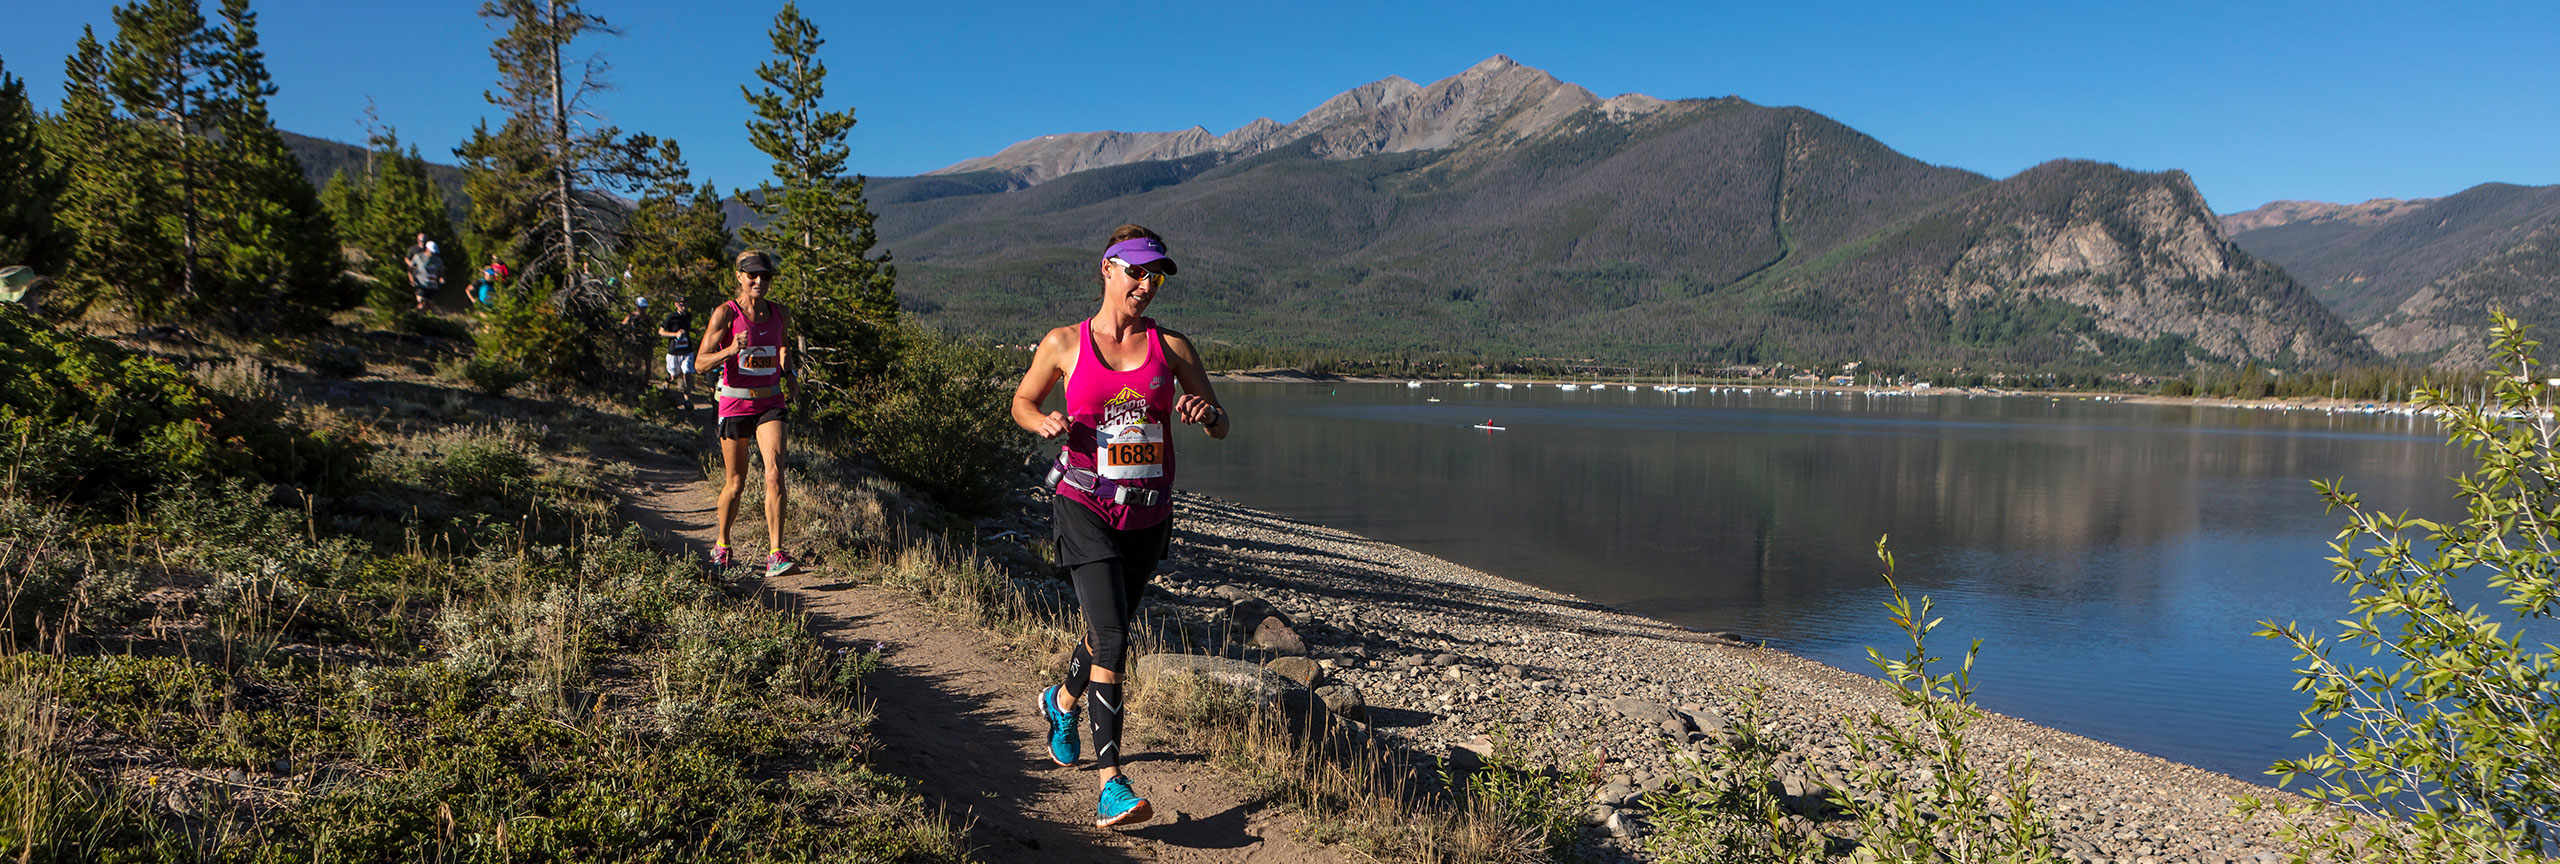 Two runners on a trail by Lake Dillon